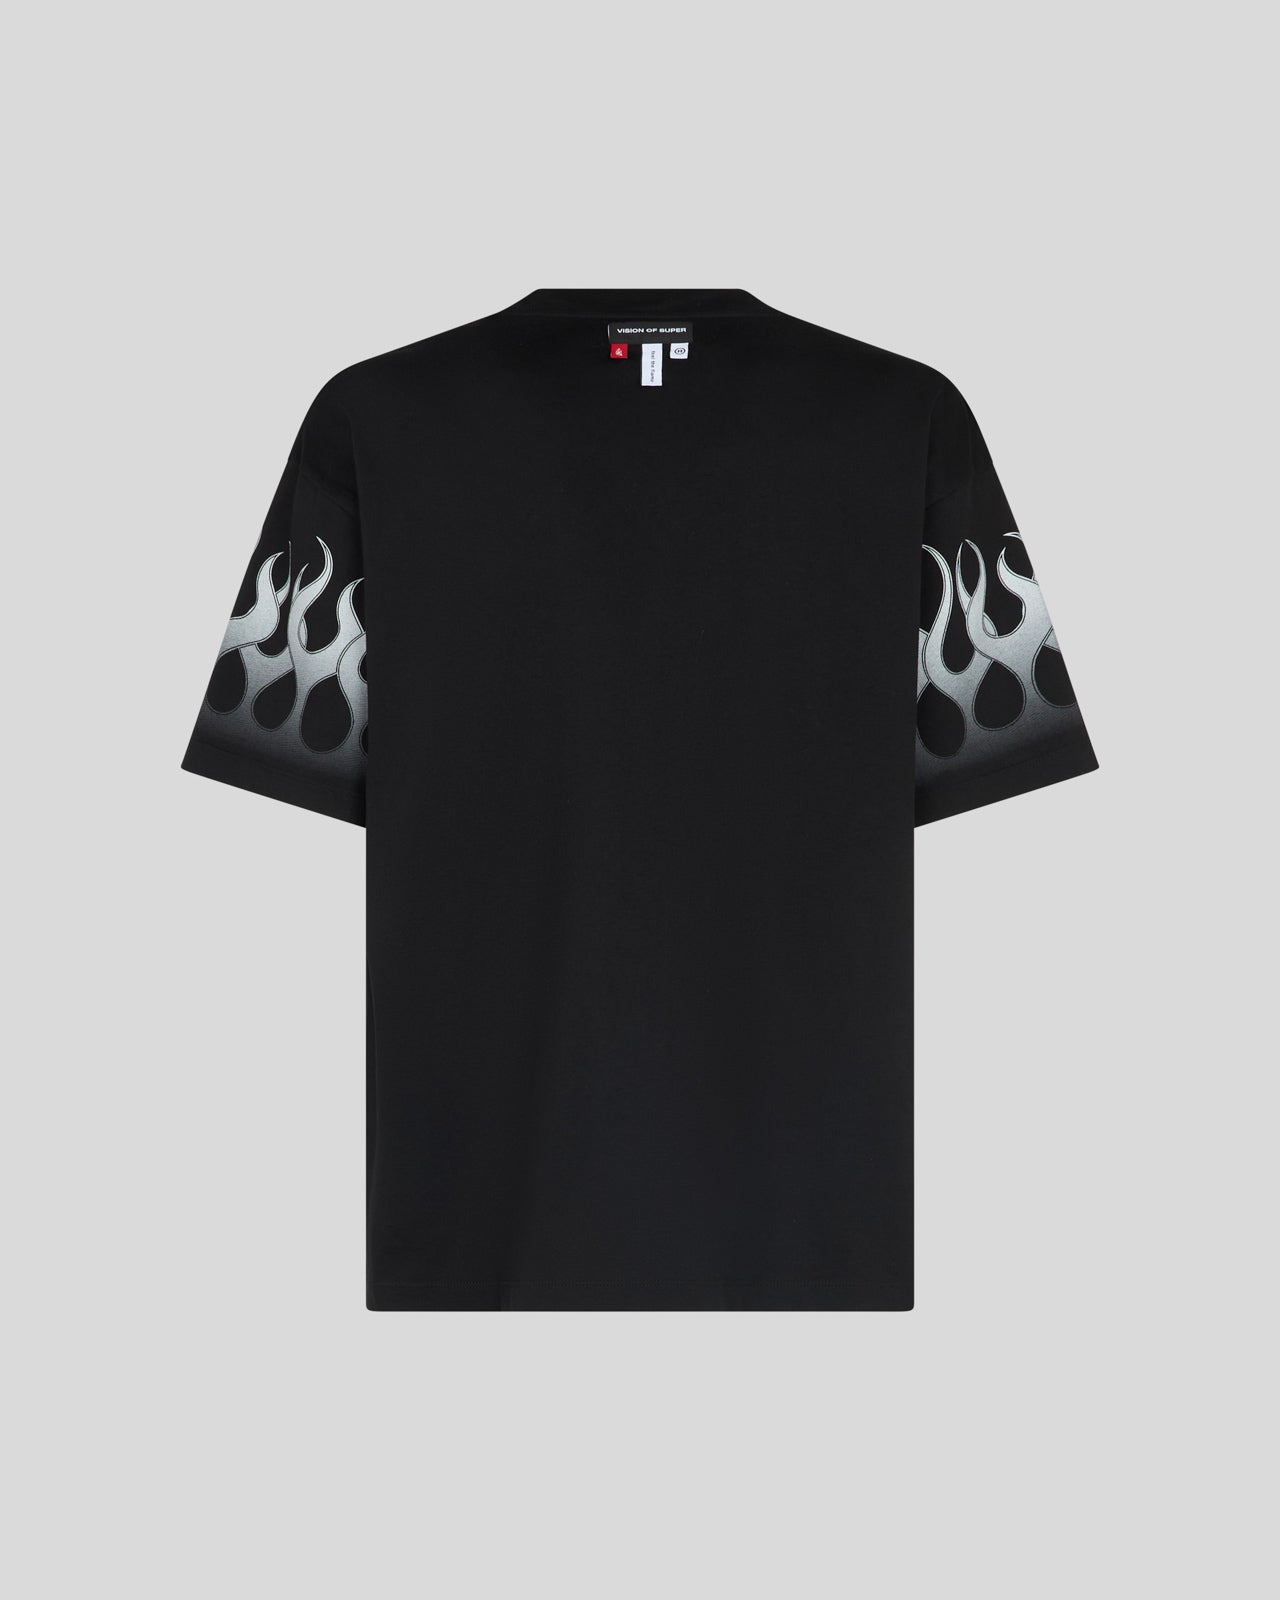 VISION OF SUPER BLACK TSHIRT WITH WHITE RACING FLAMES